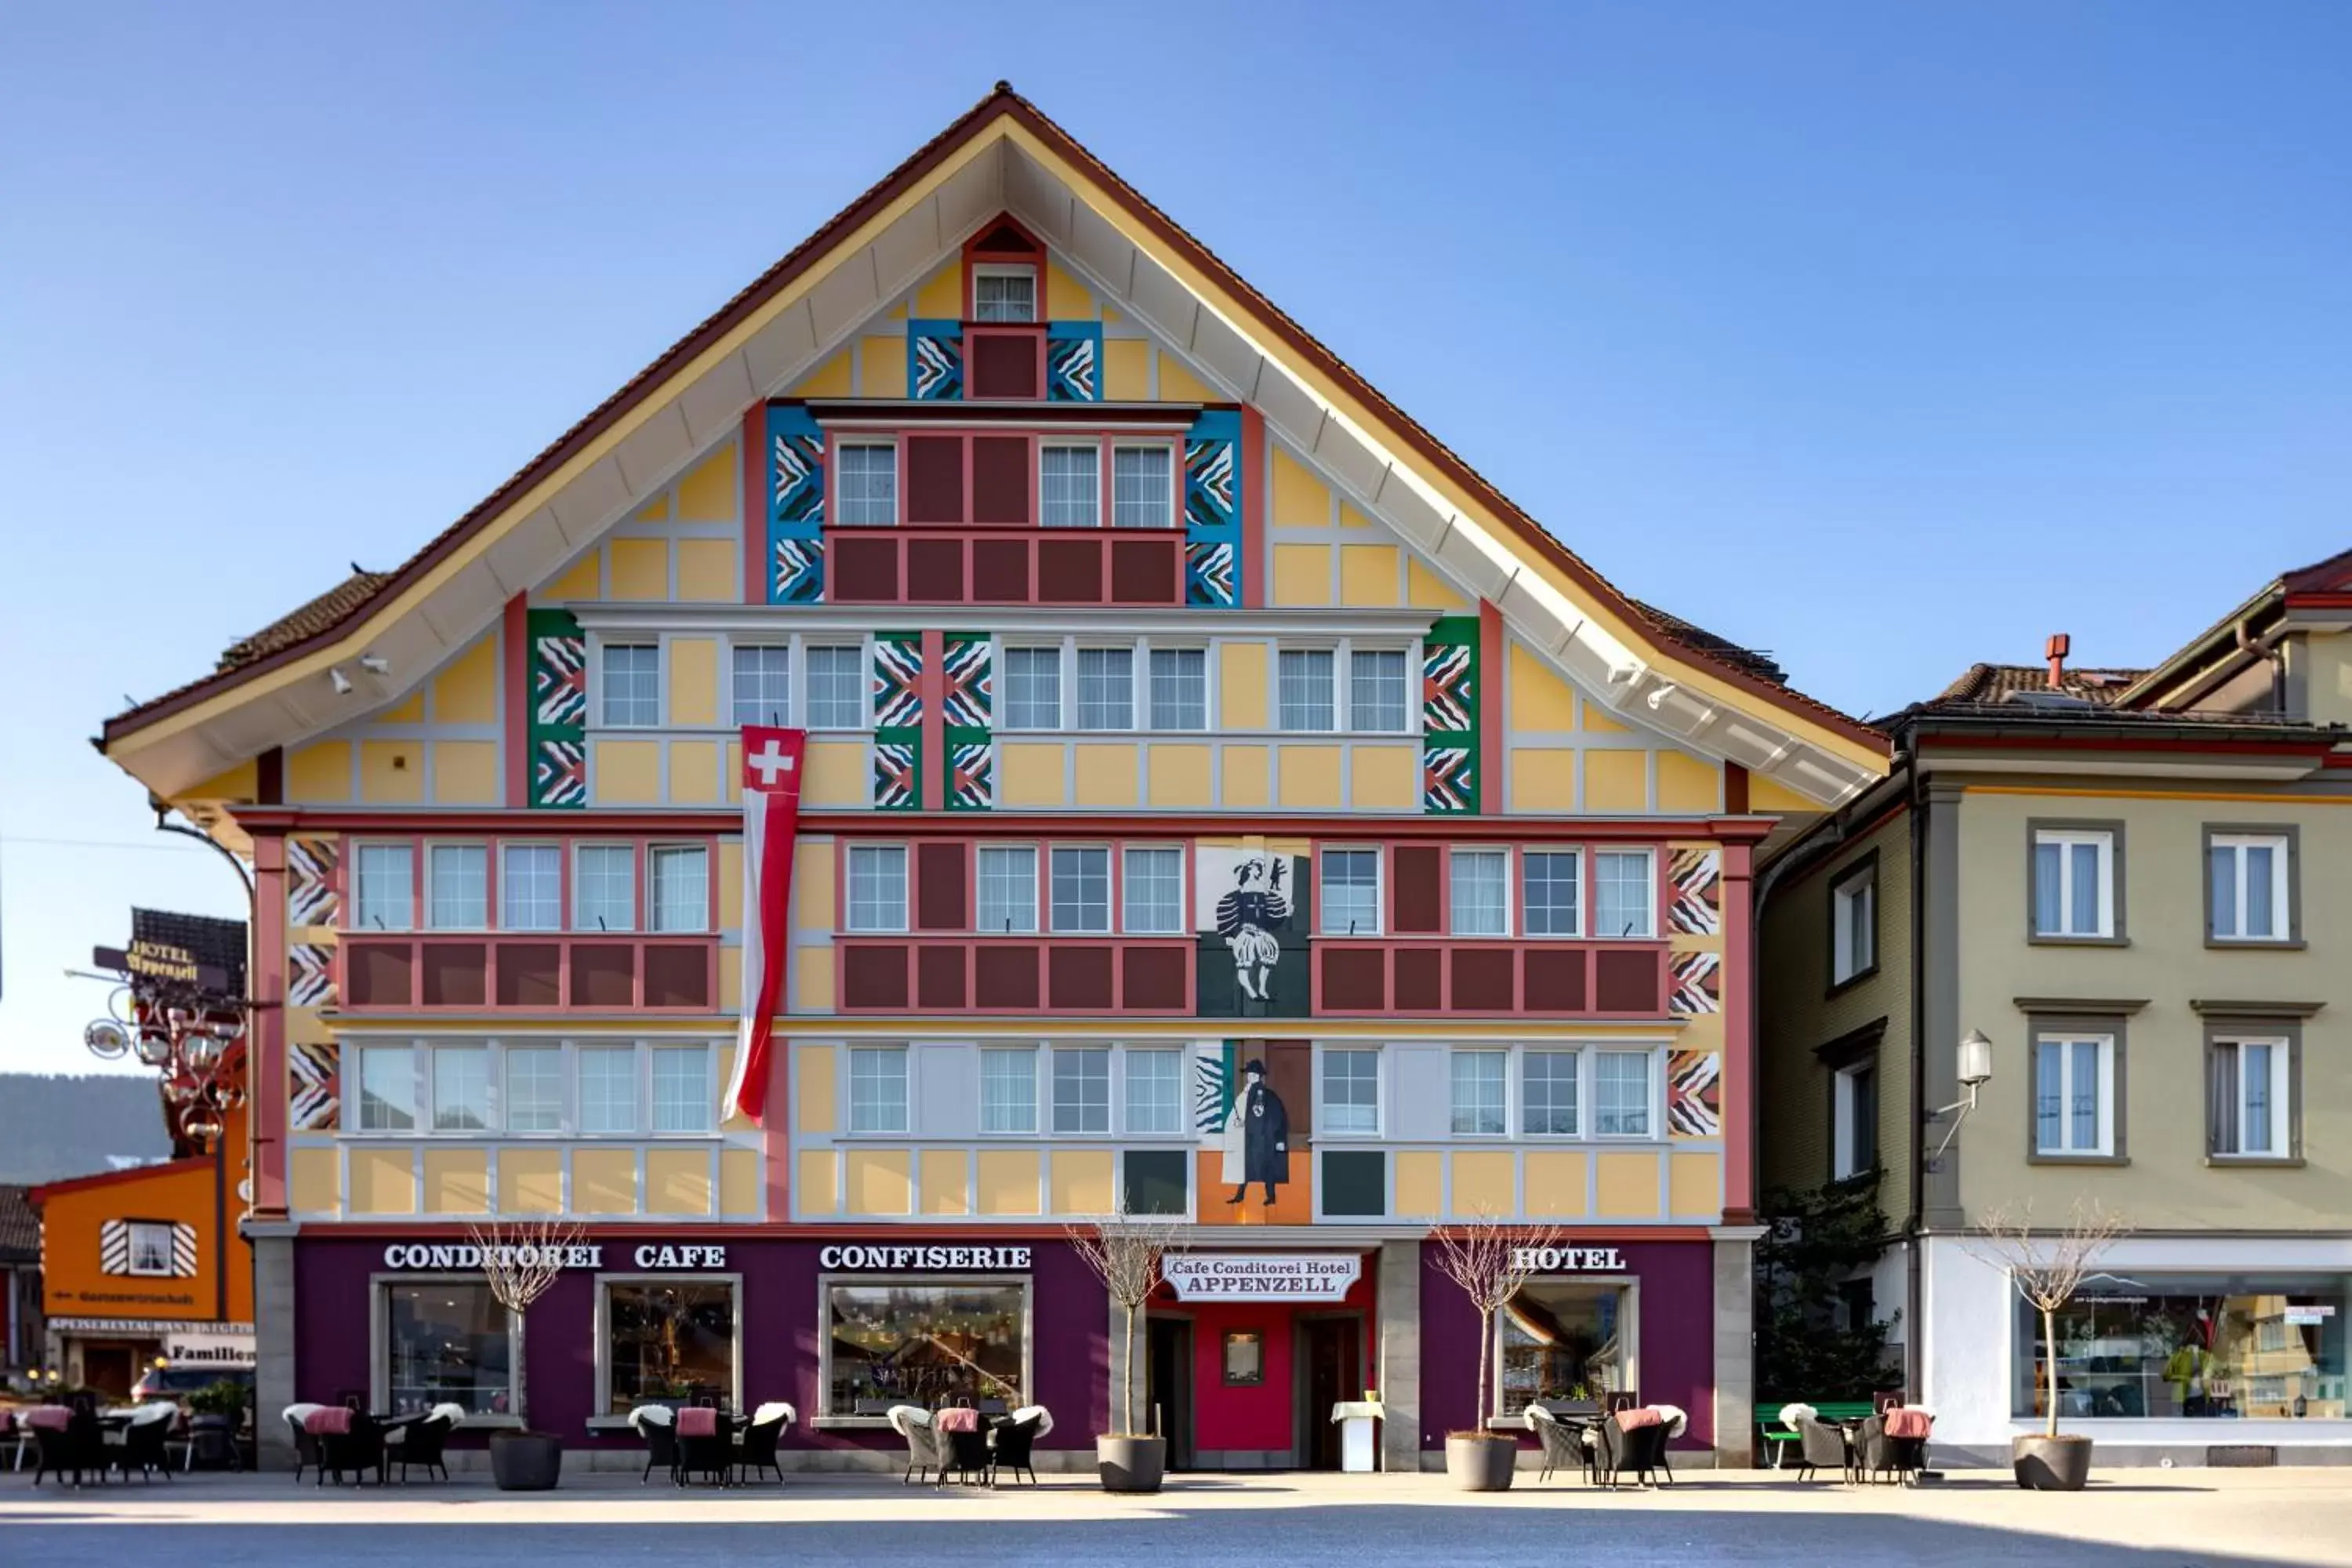 Property Building in Hotel Appenzell